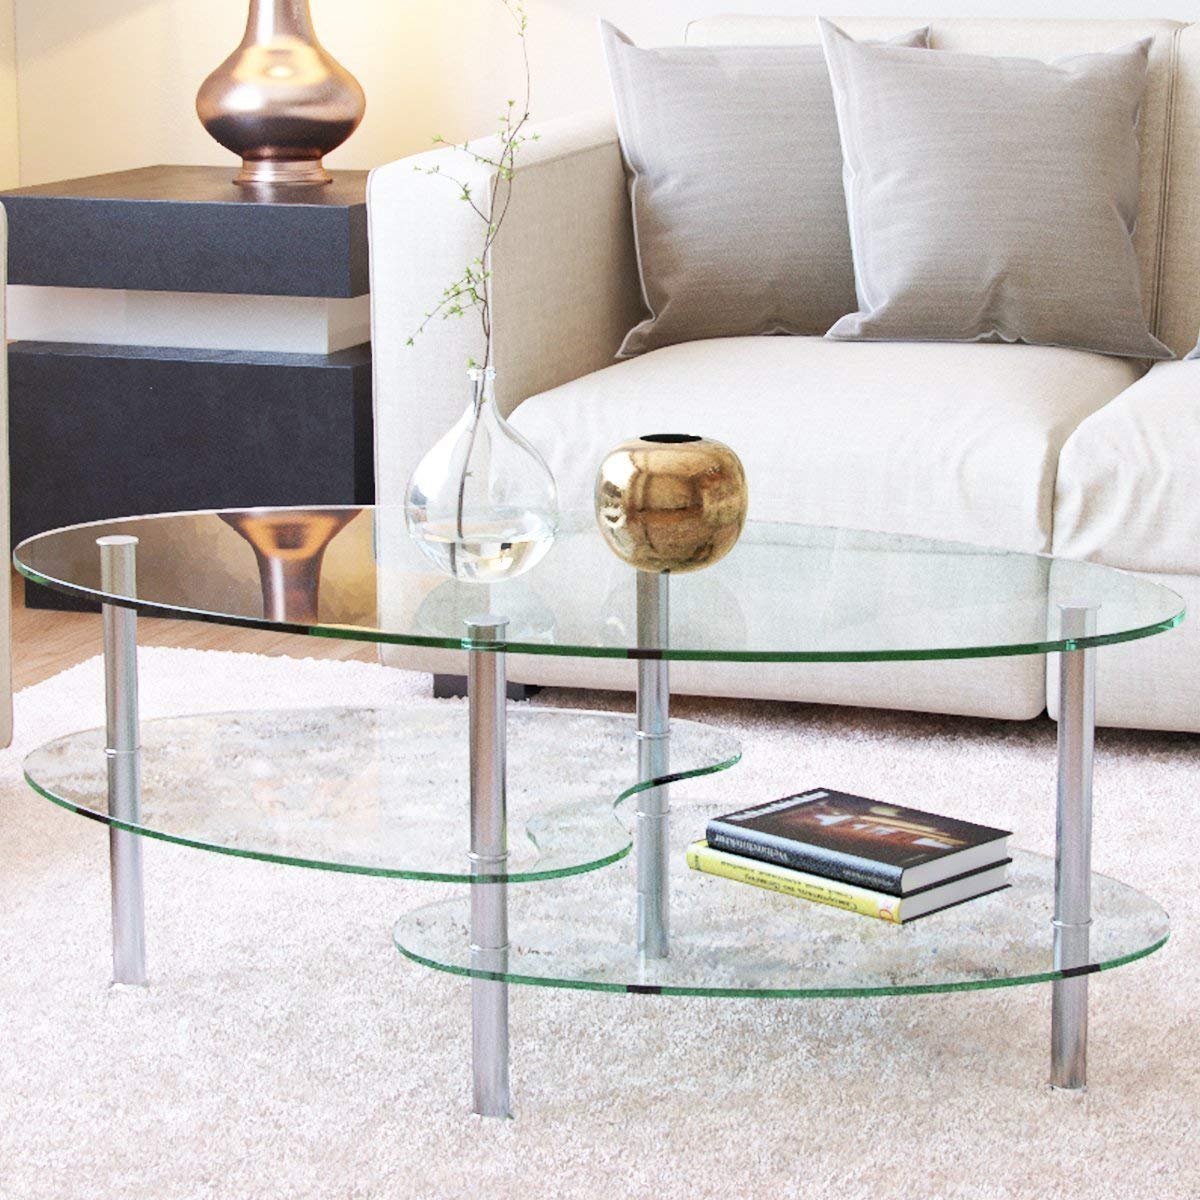 mecor glass coffee table with tier tempered end tables and boards sturdy chrome stainless steel legs transparent oval tea for sauder cherry furniture solar powered outdoor lights